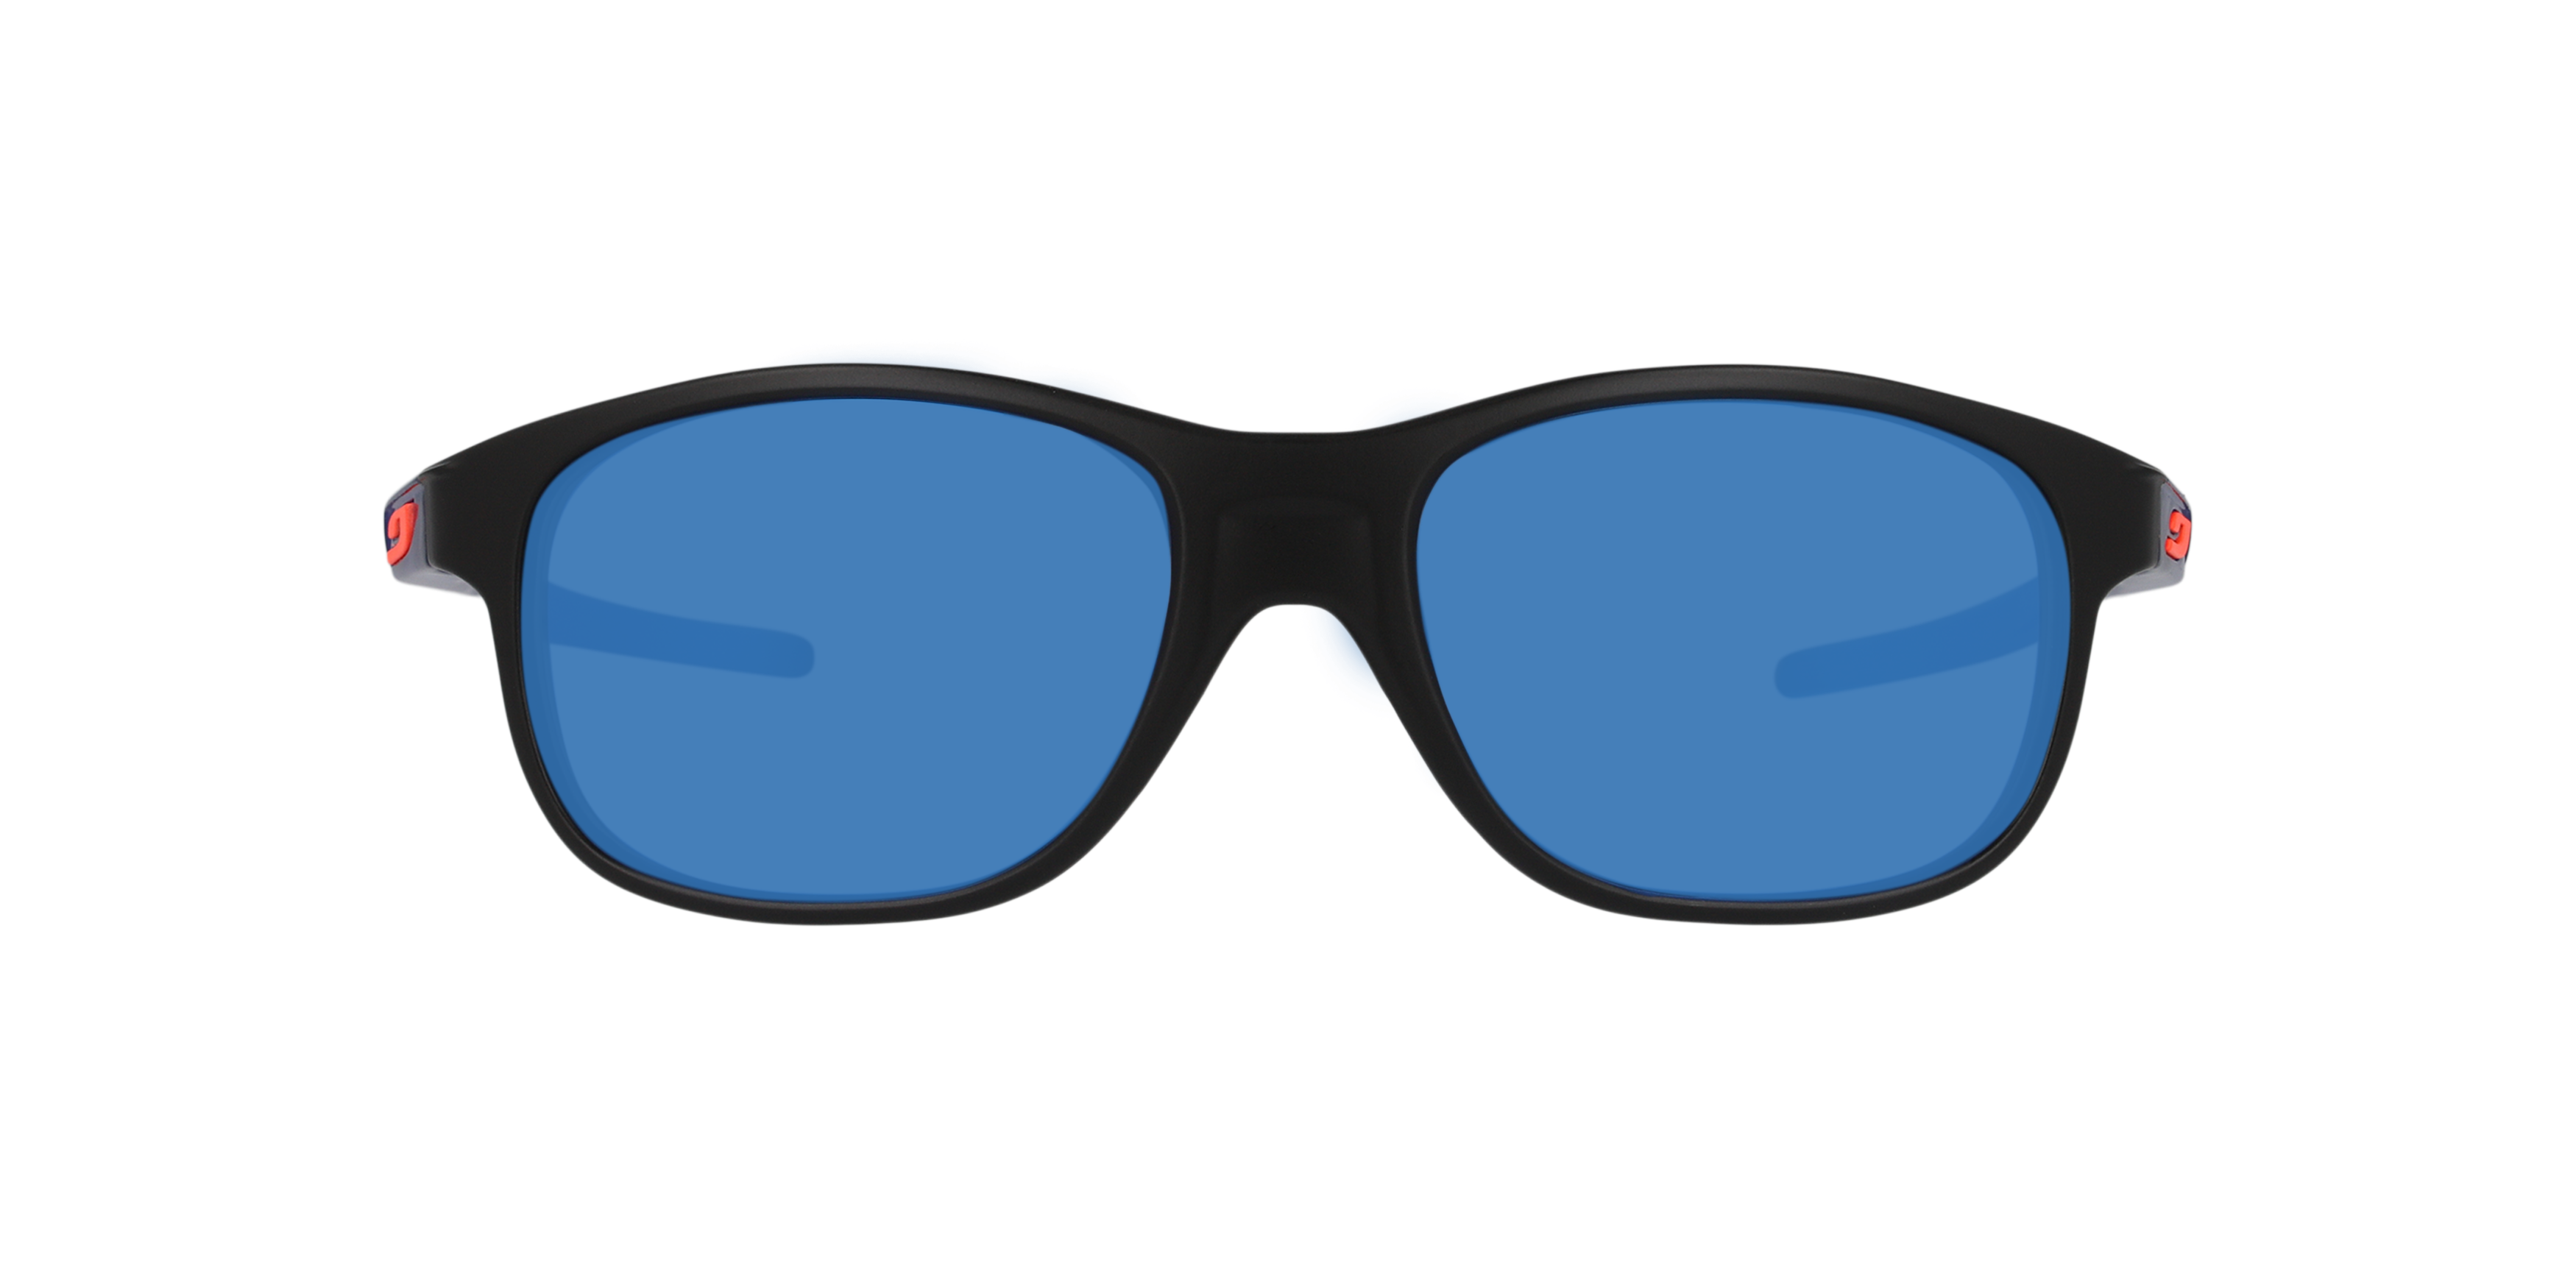 [products.image.front] Julbo ARCADE 1122